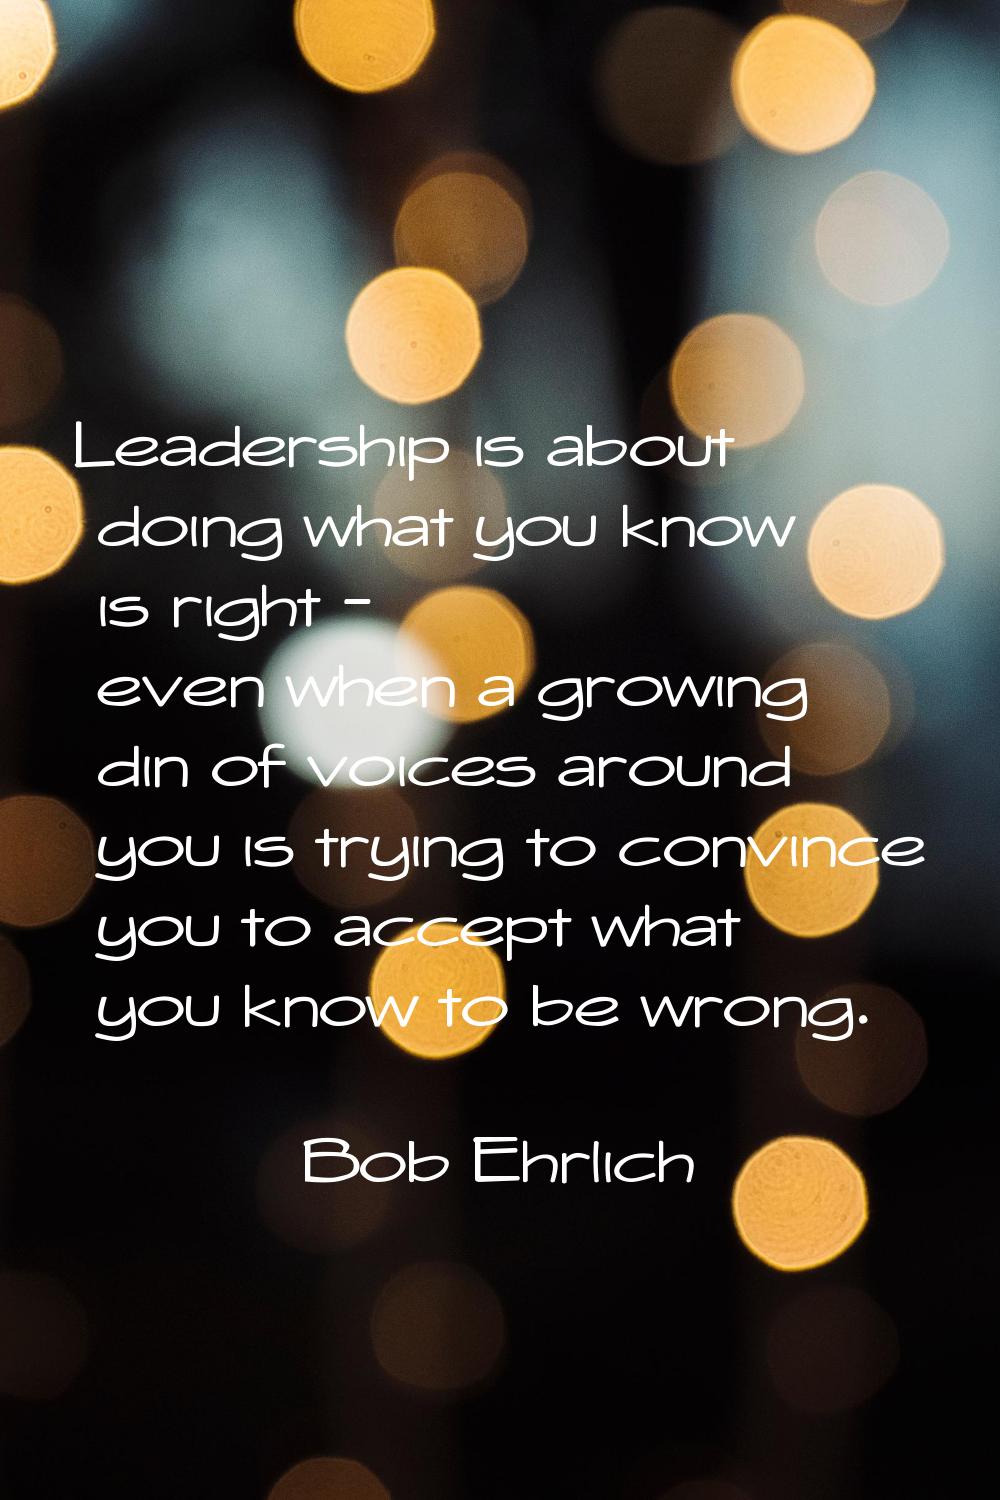 Leadership is about doing what you know is right - even when a growing din of voices around you is 